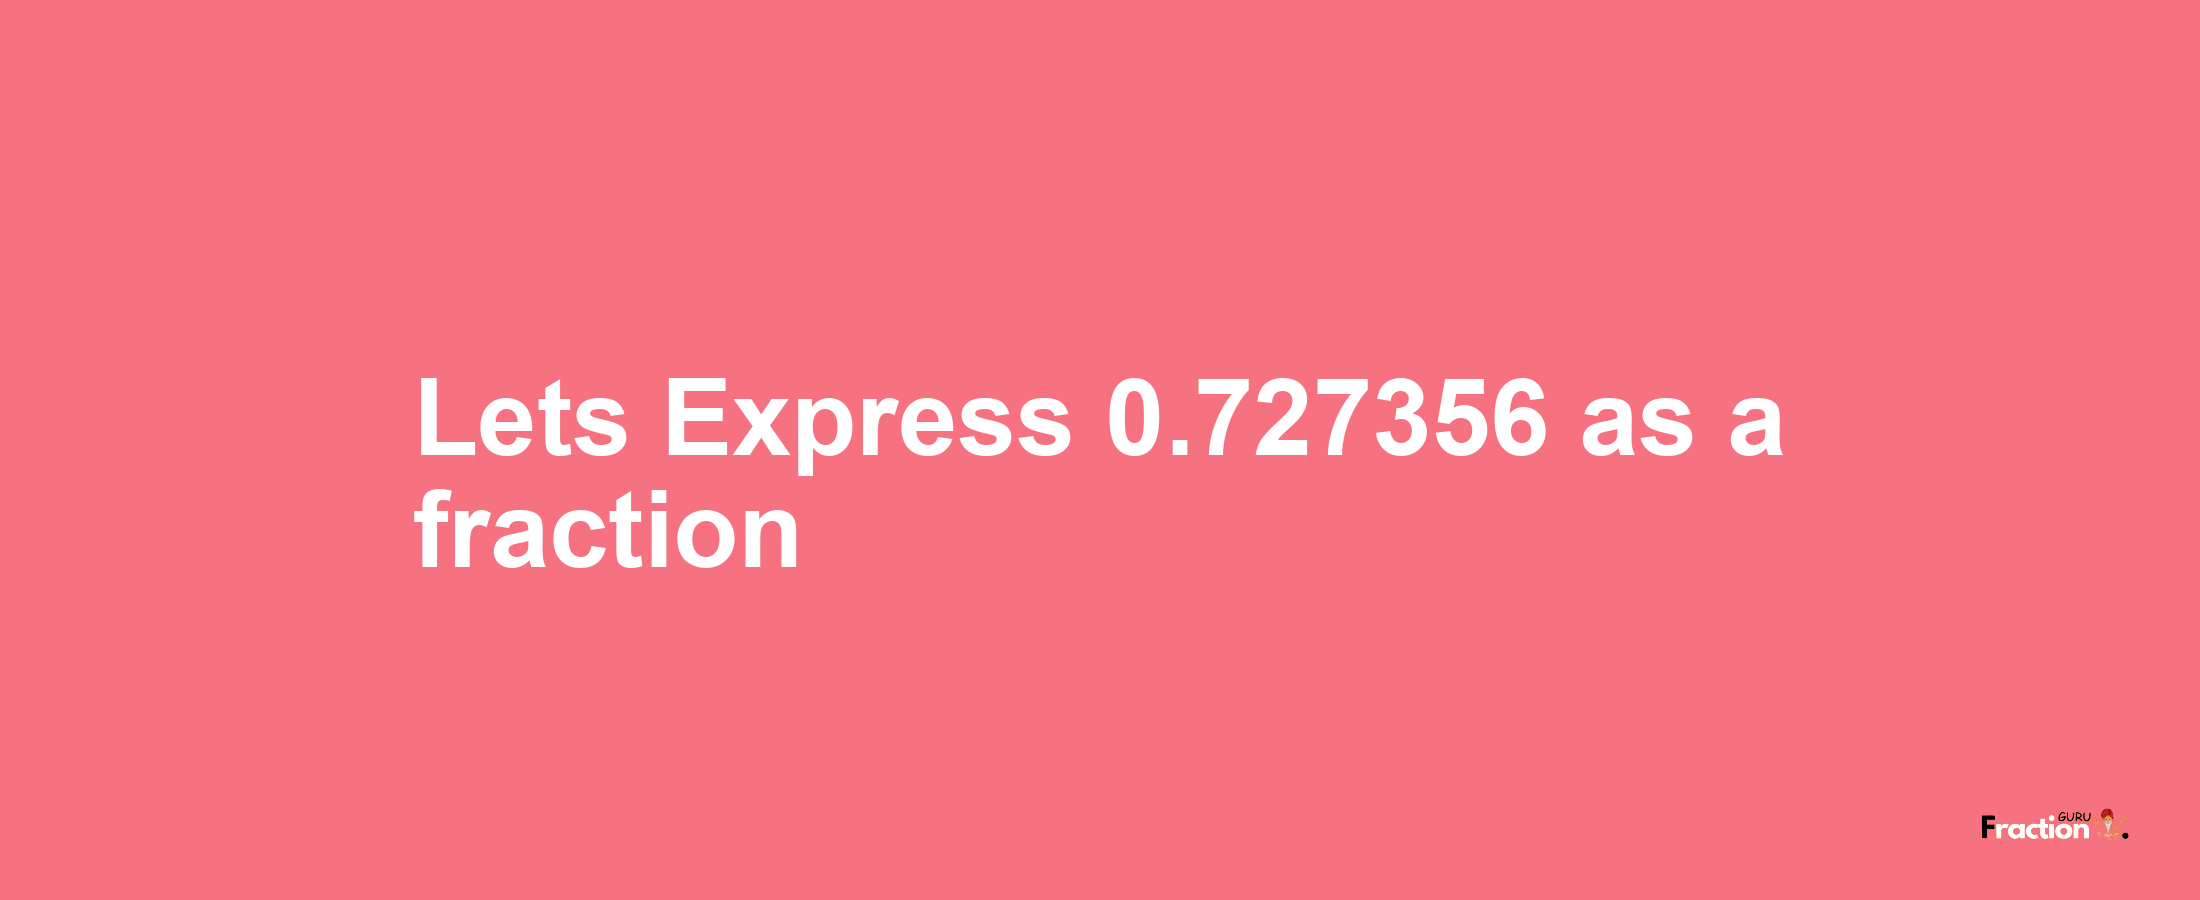 Lets Express 0.727356 as afraction